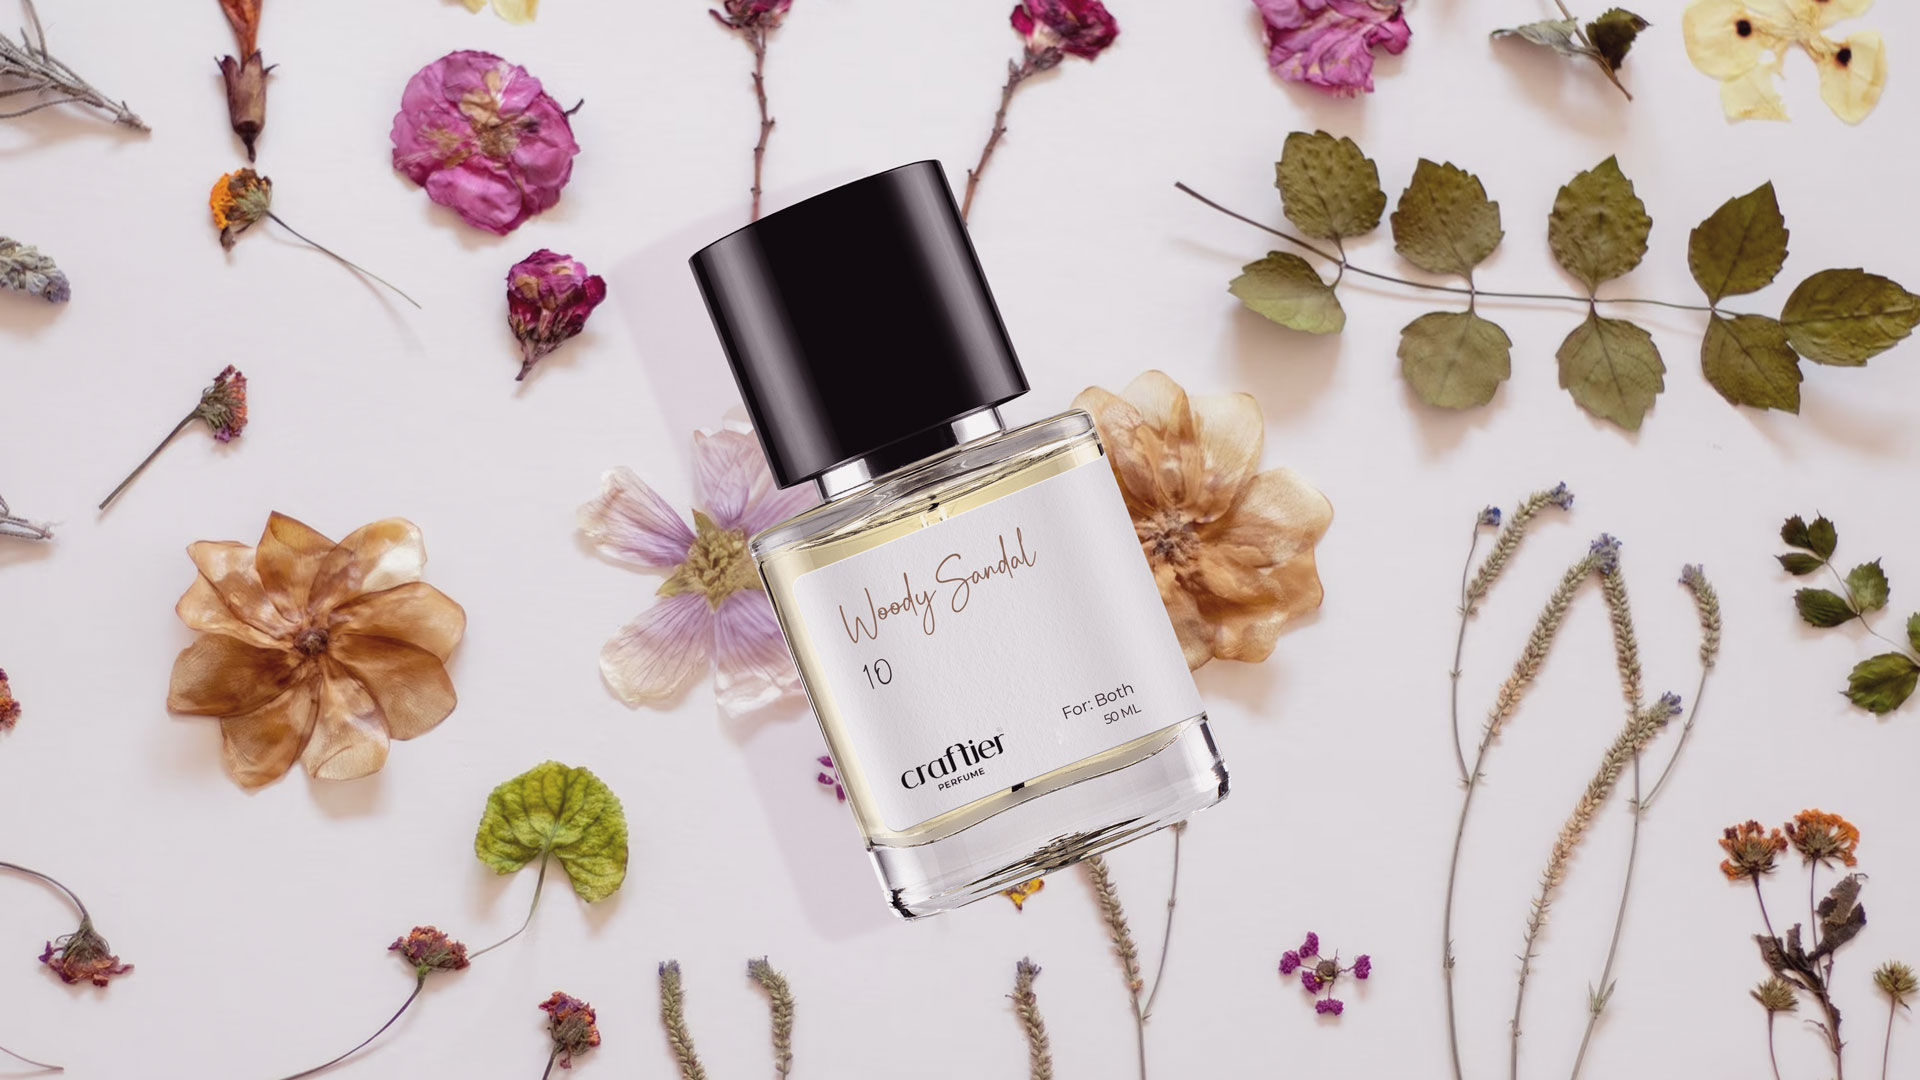 What Makes Armani Perfume So Exceptional? Why Does It Have Such a Captivating Aroma?